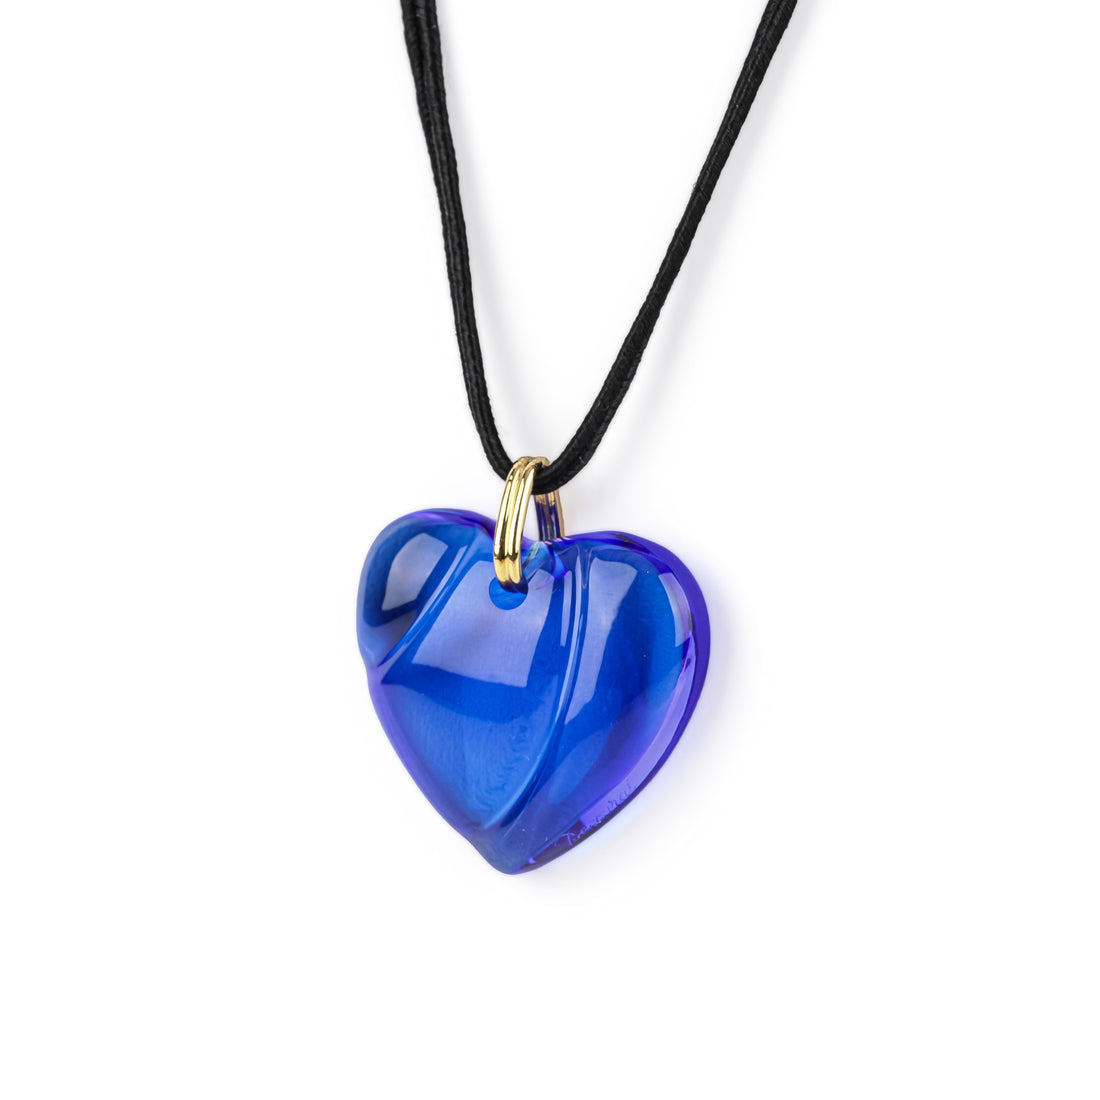 BACCARAT Blue Crystal Heart Pendant on Cord Necklace